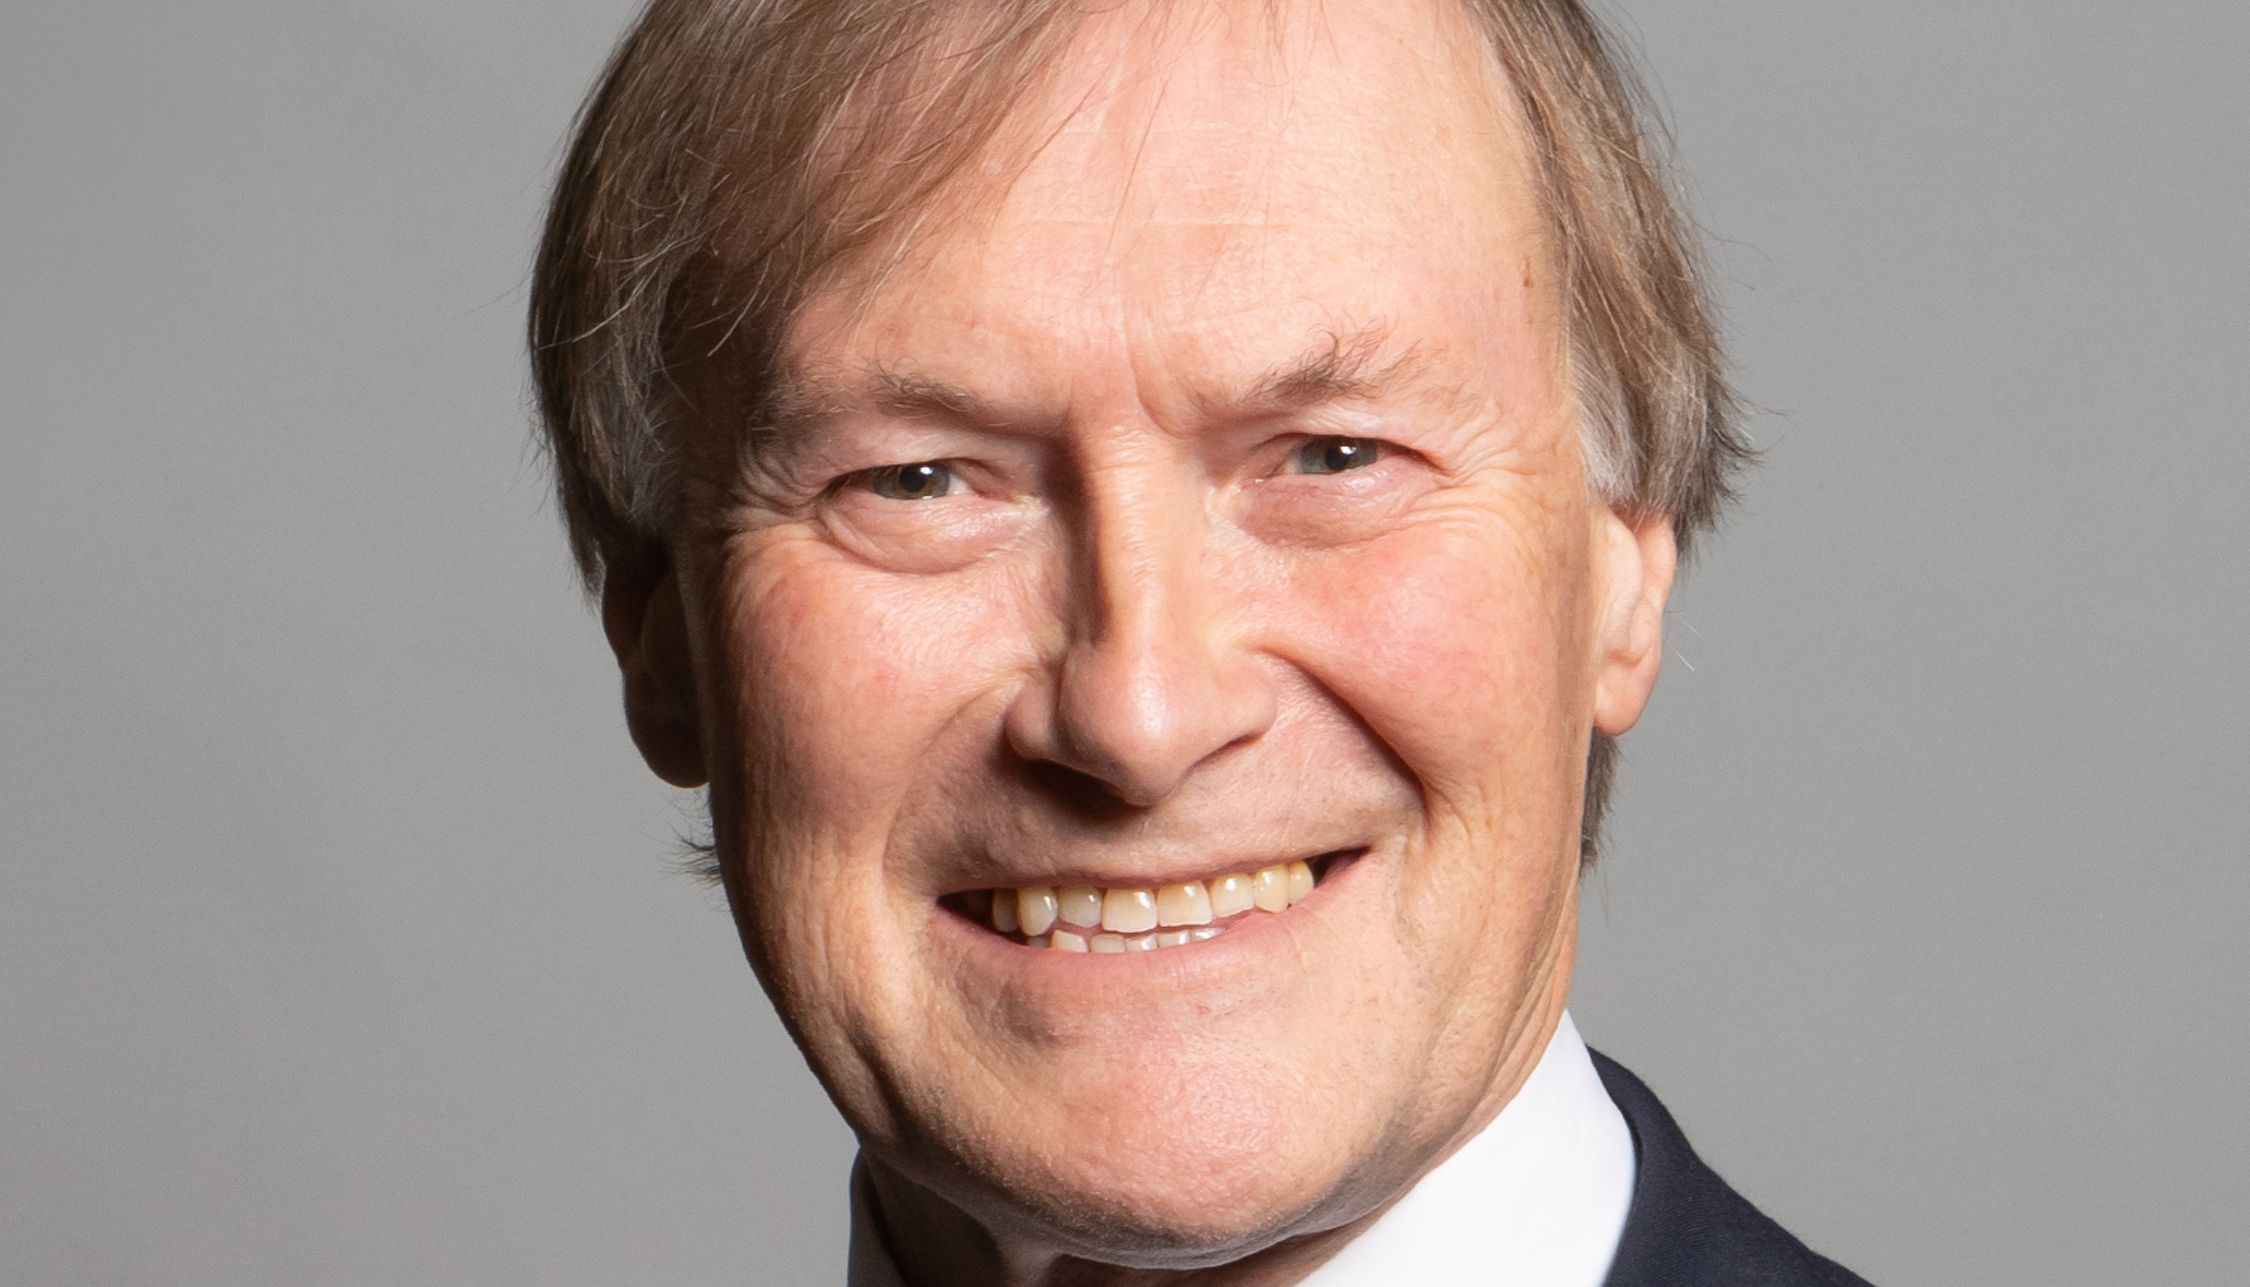 Sir David Amess was killed in October last year